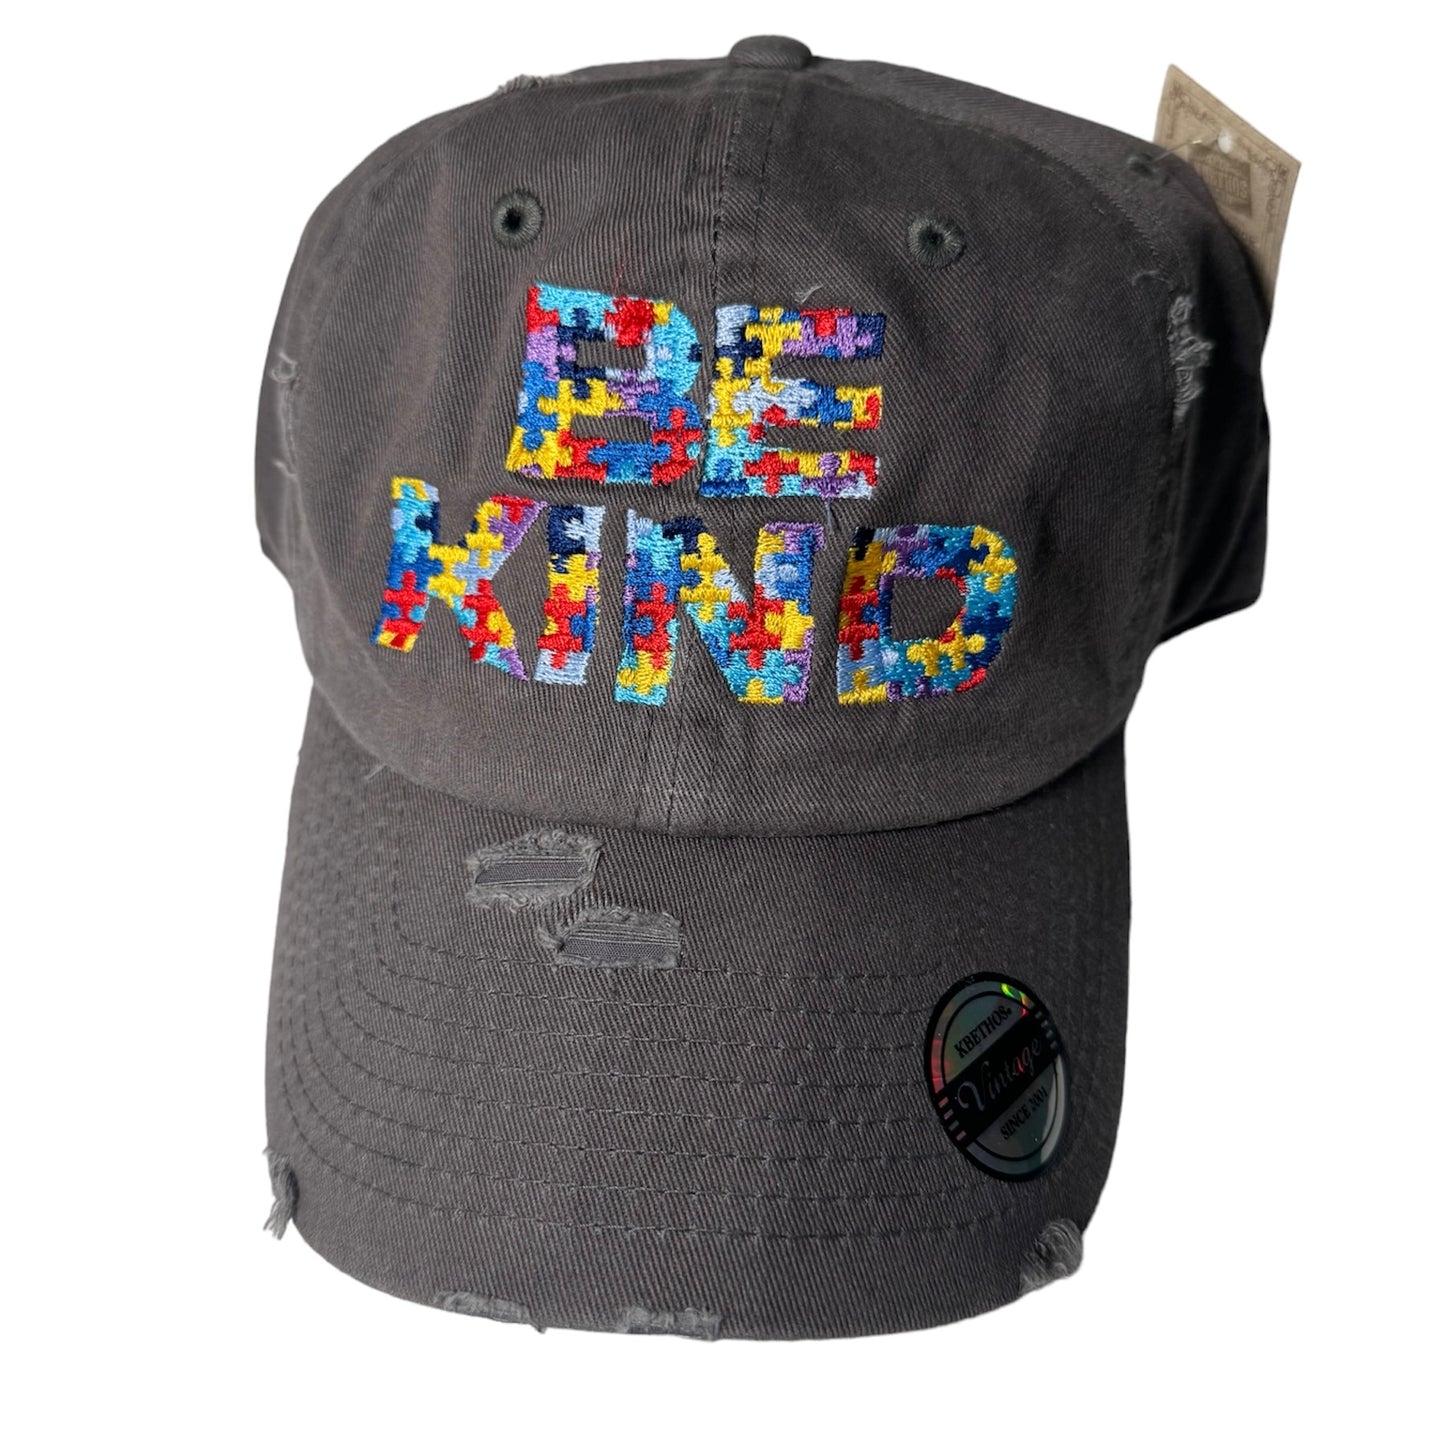 Limited Addition: “BE KIND” DISTRESSED HAT